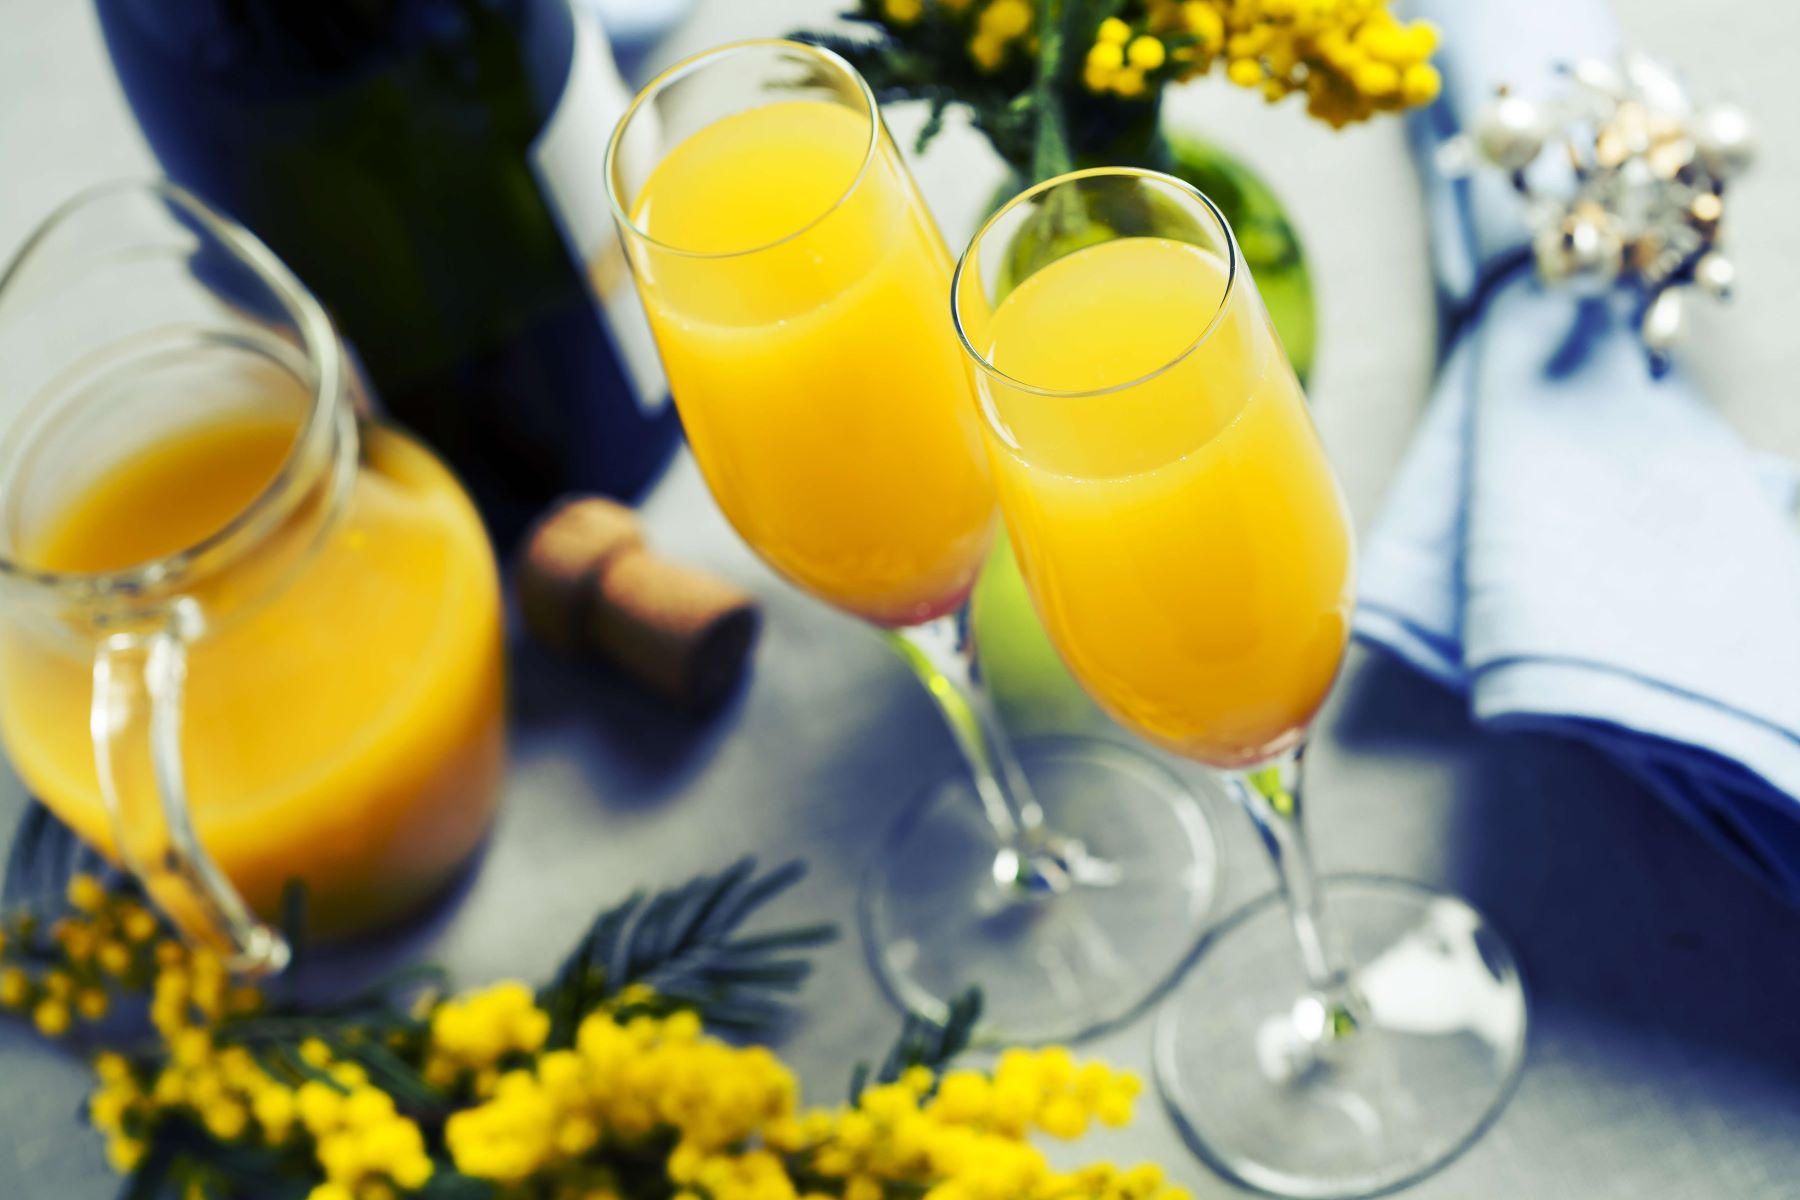 11 Facts About National Mimosa Day May 16th 